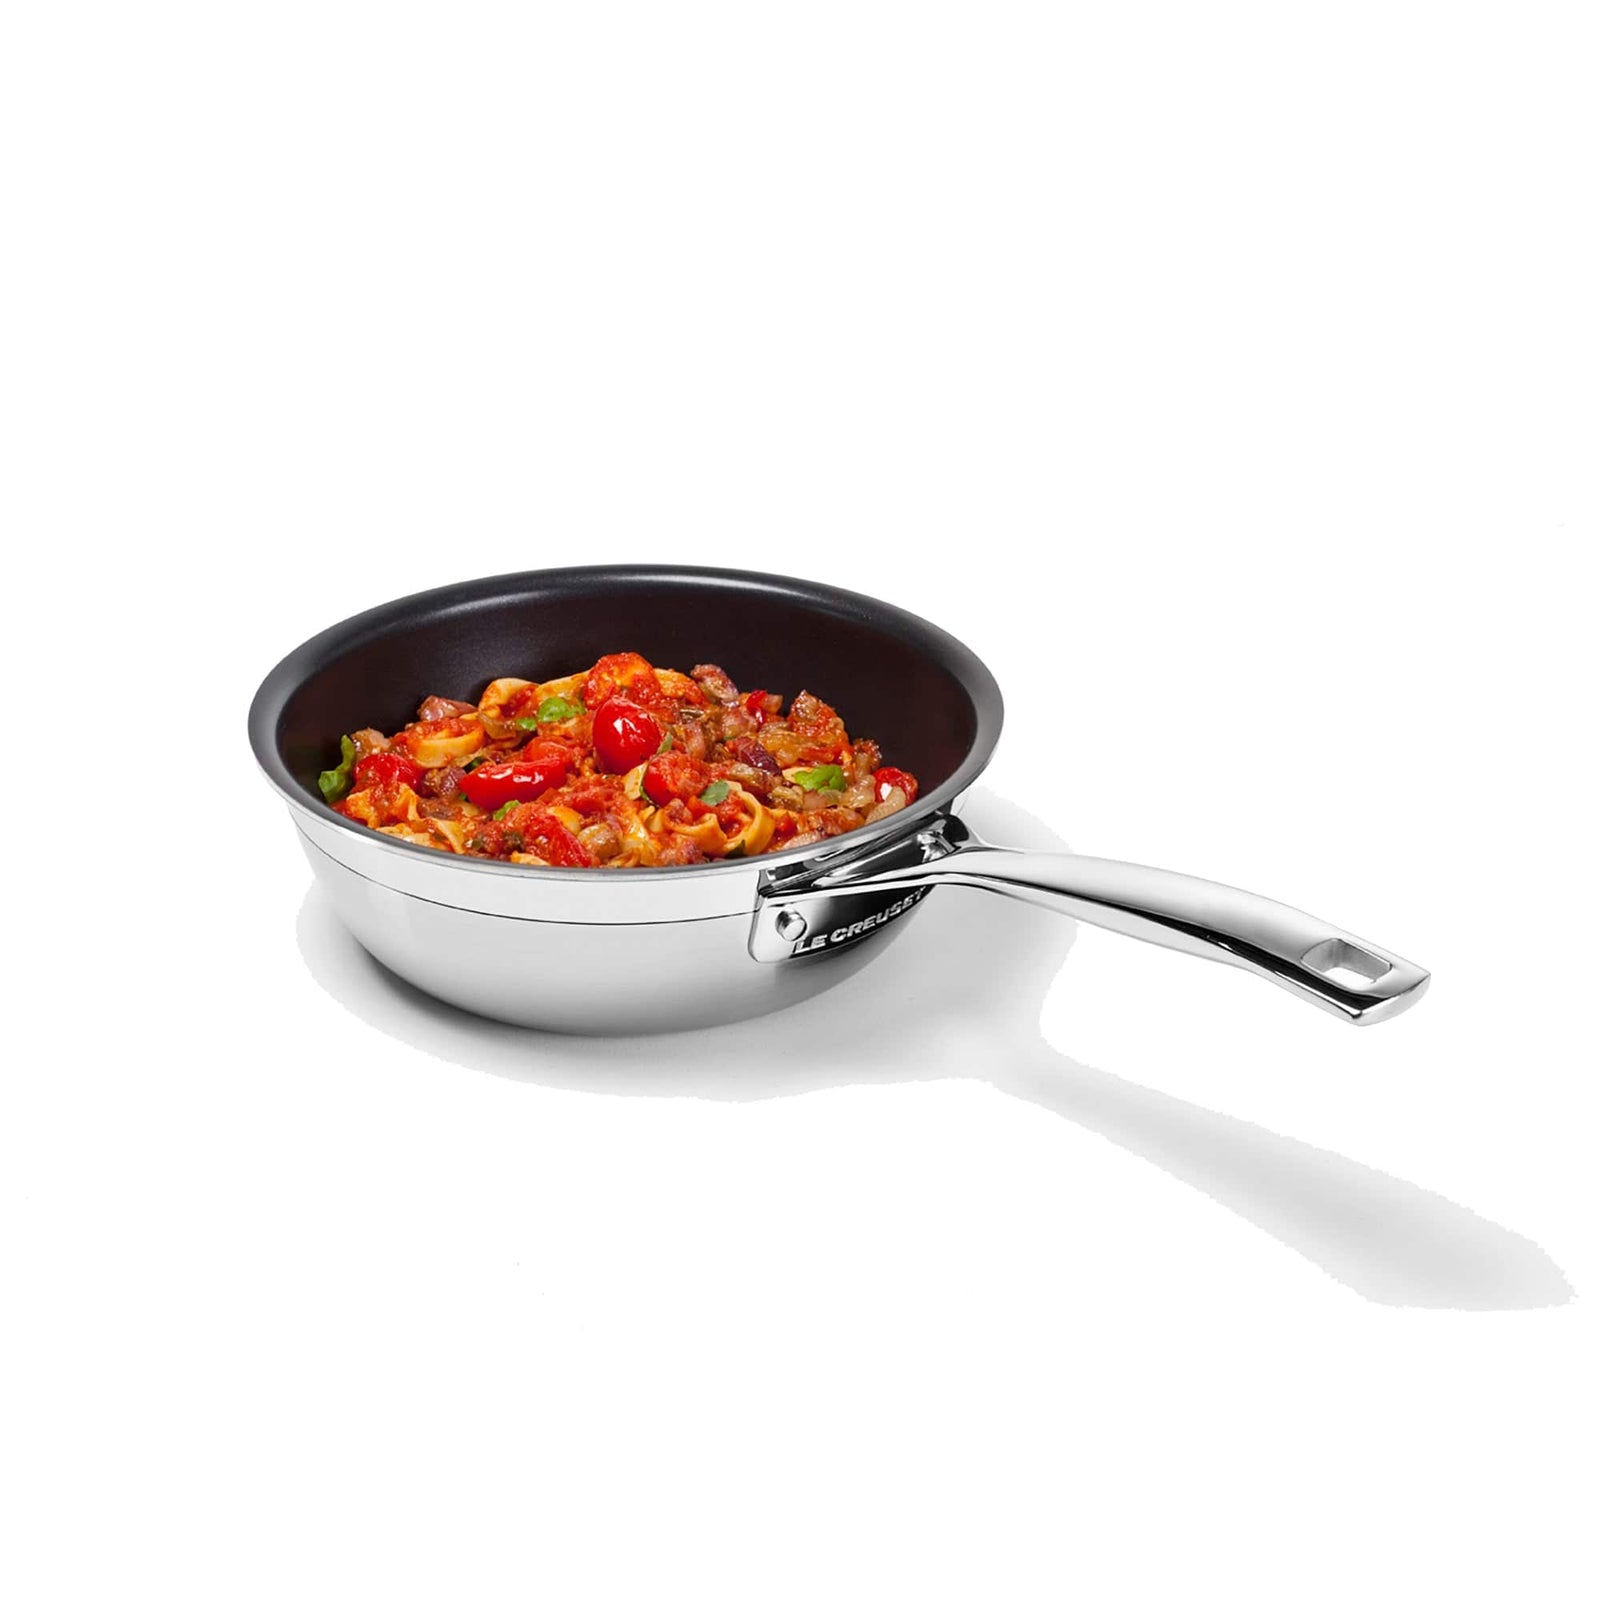 Le Creuset 3-PLY Stainless Steel 20cm Non-Stick Chef's Pan